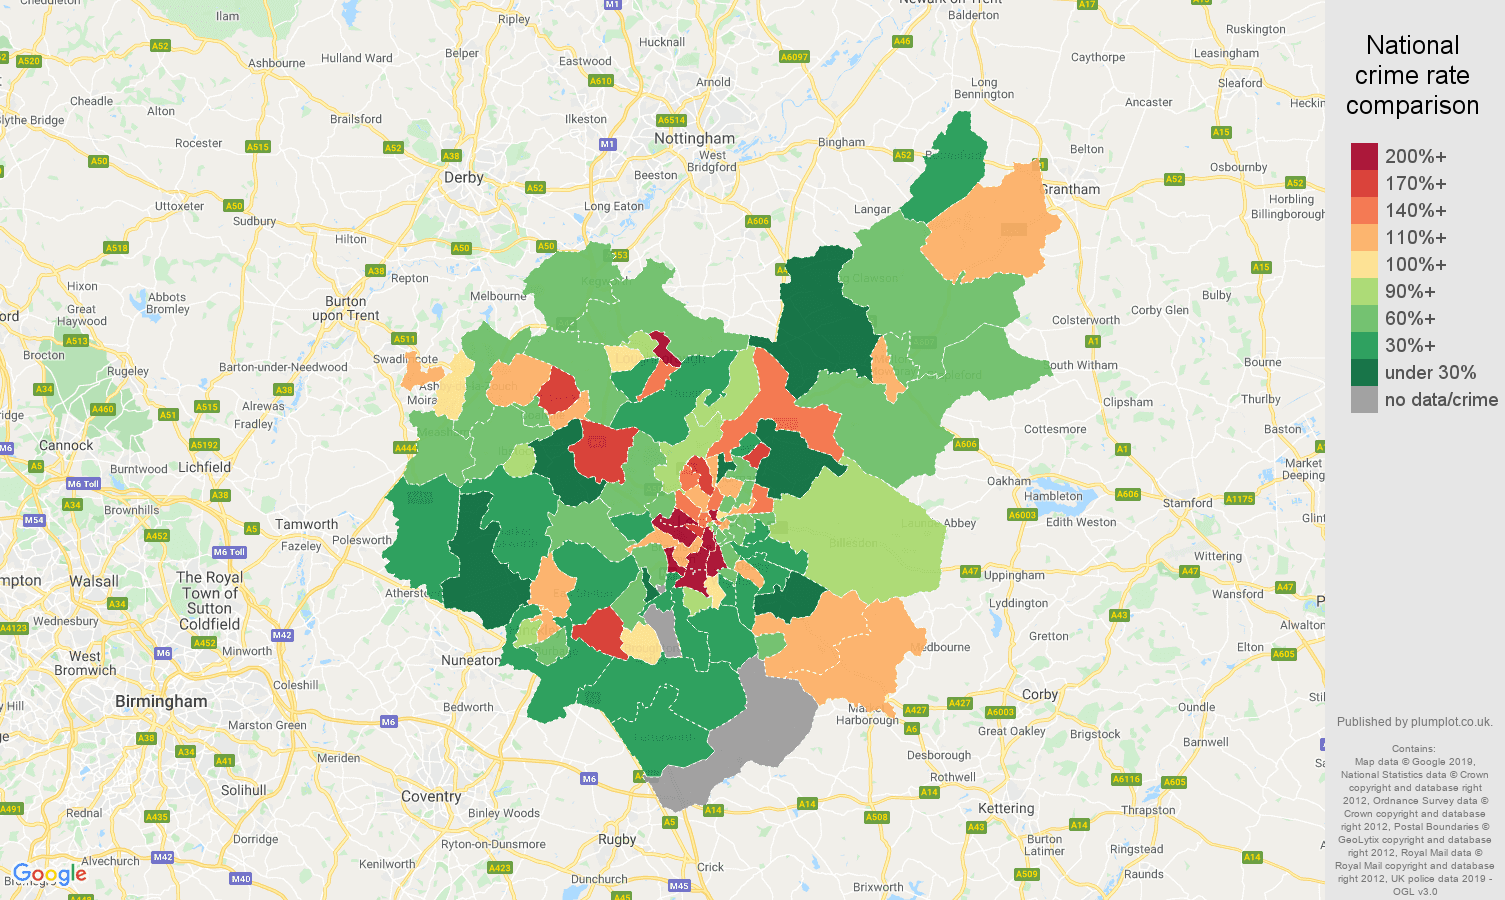 Leicestershire other crime rate comparison map